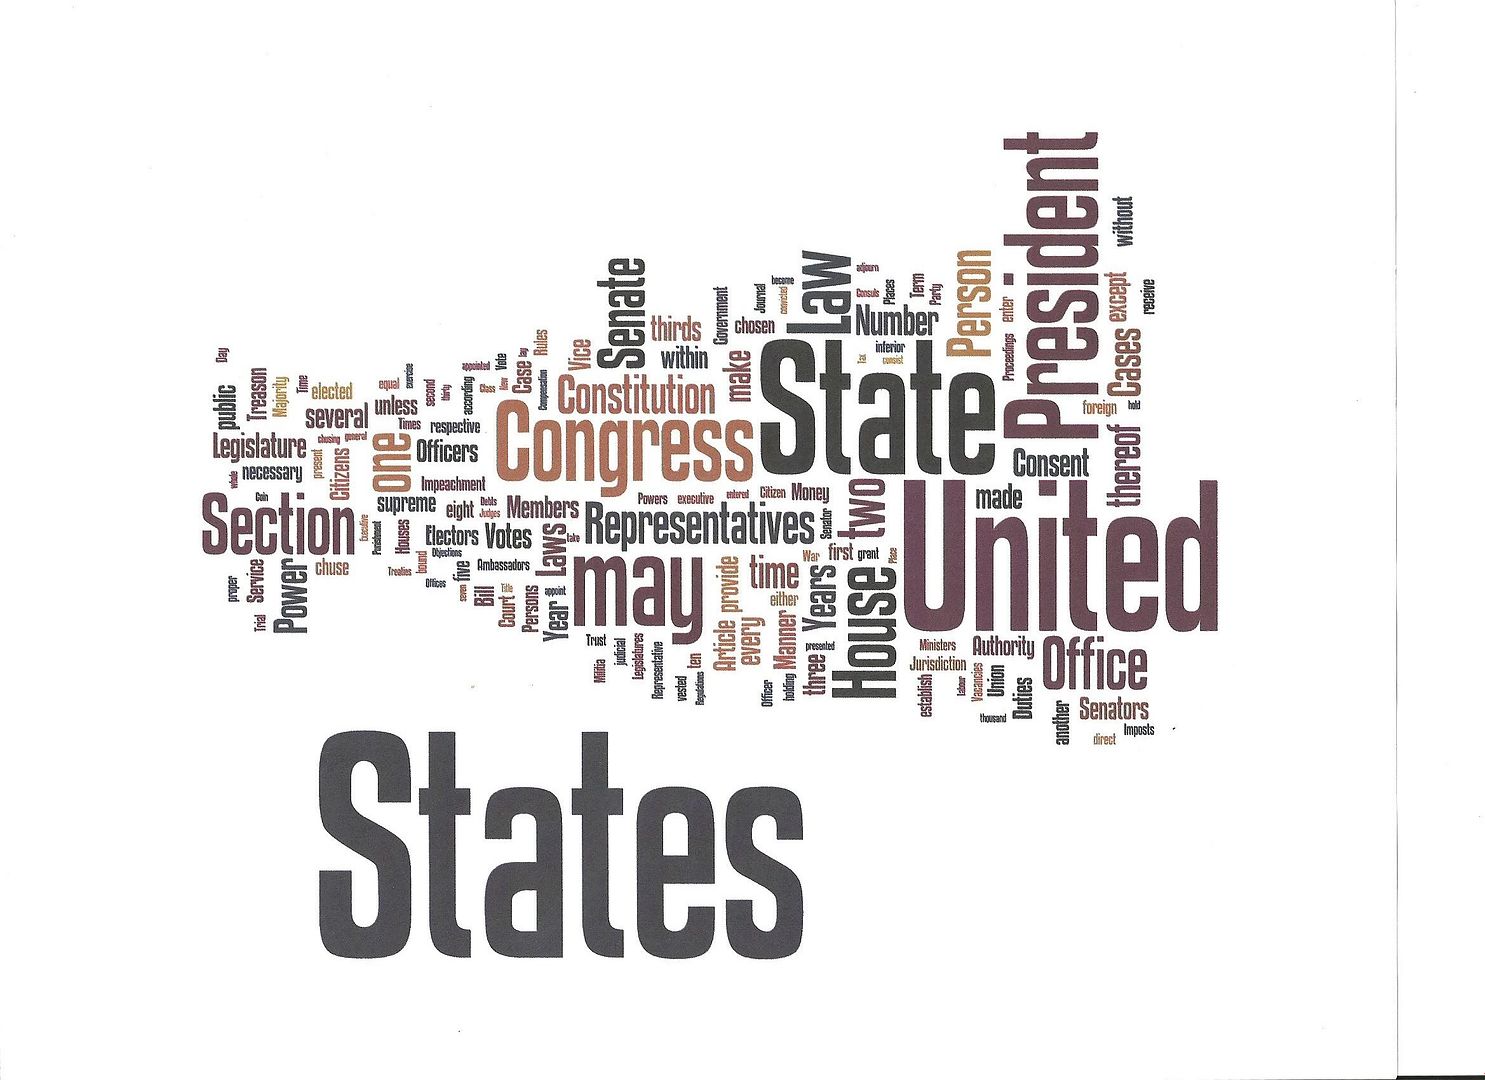 A wordle created using the words of the US Constitution